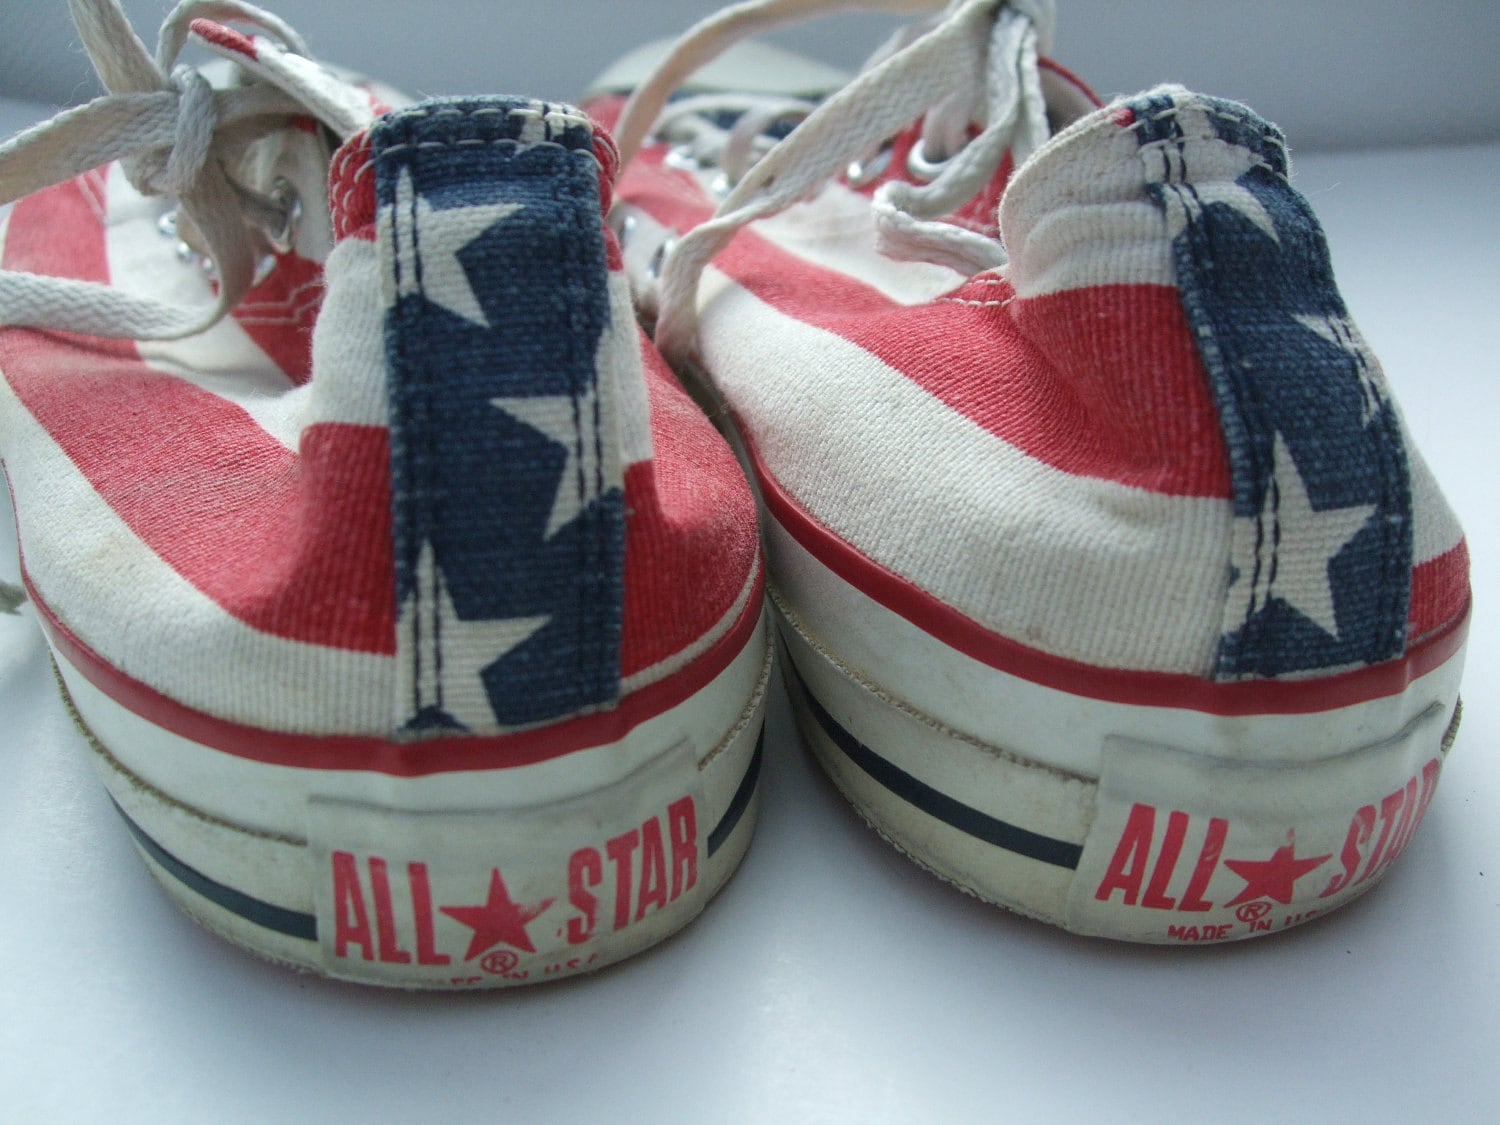 Vintage 1980s Converse All Star Sneakers Tennis Shoes Red